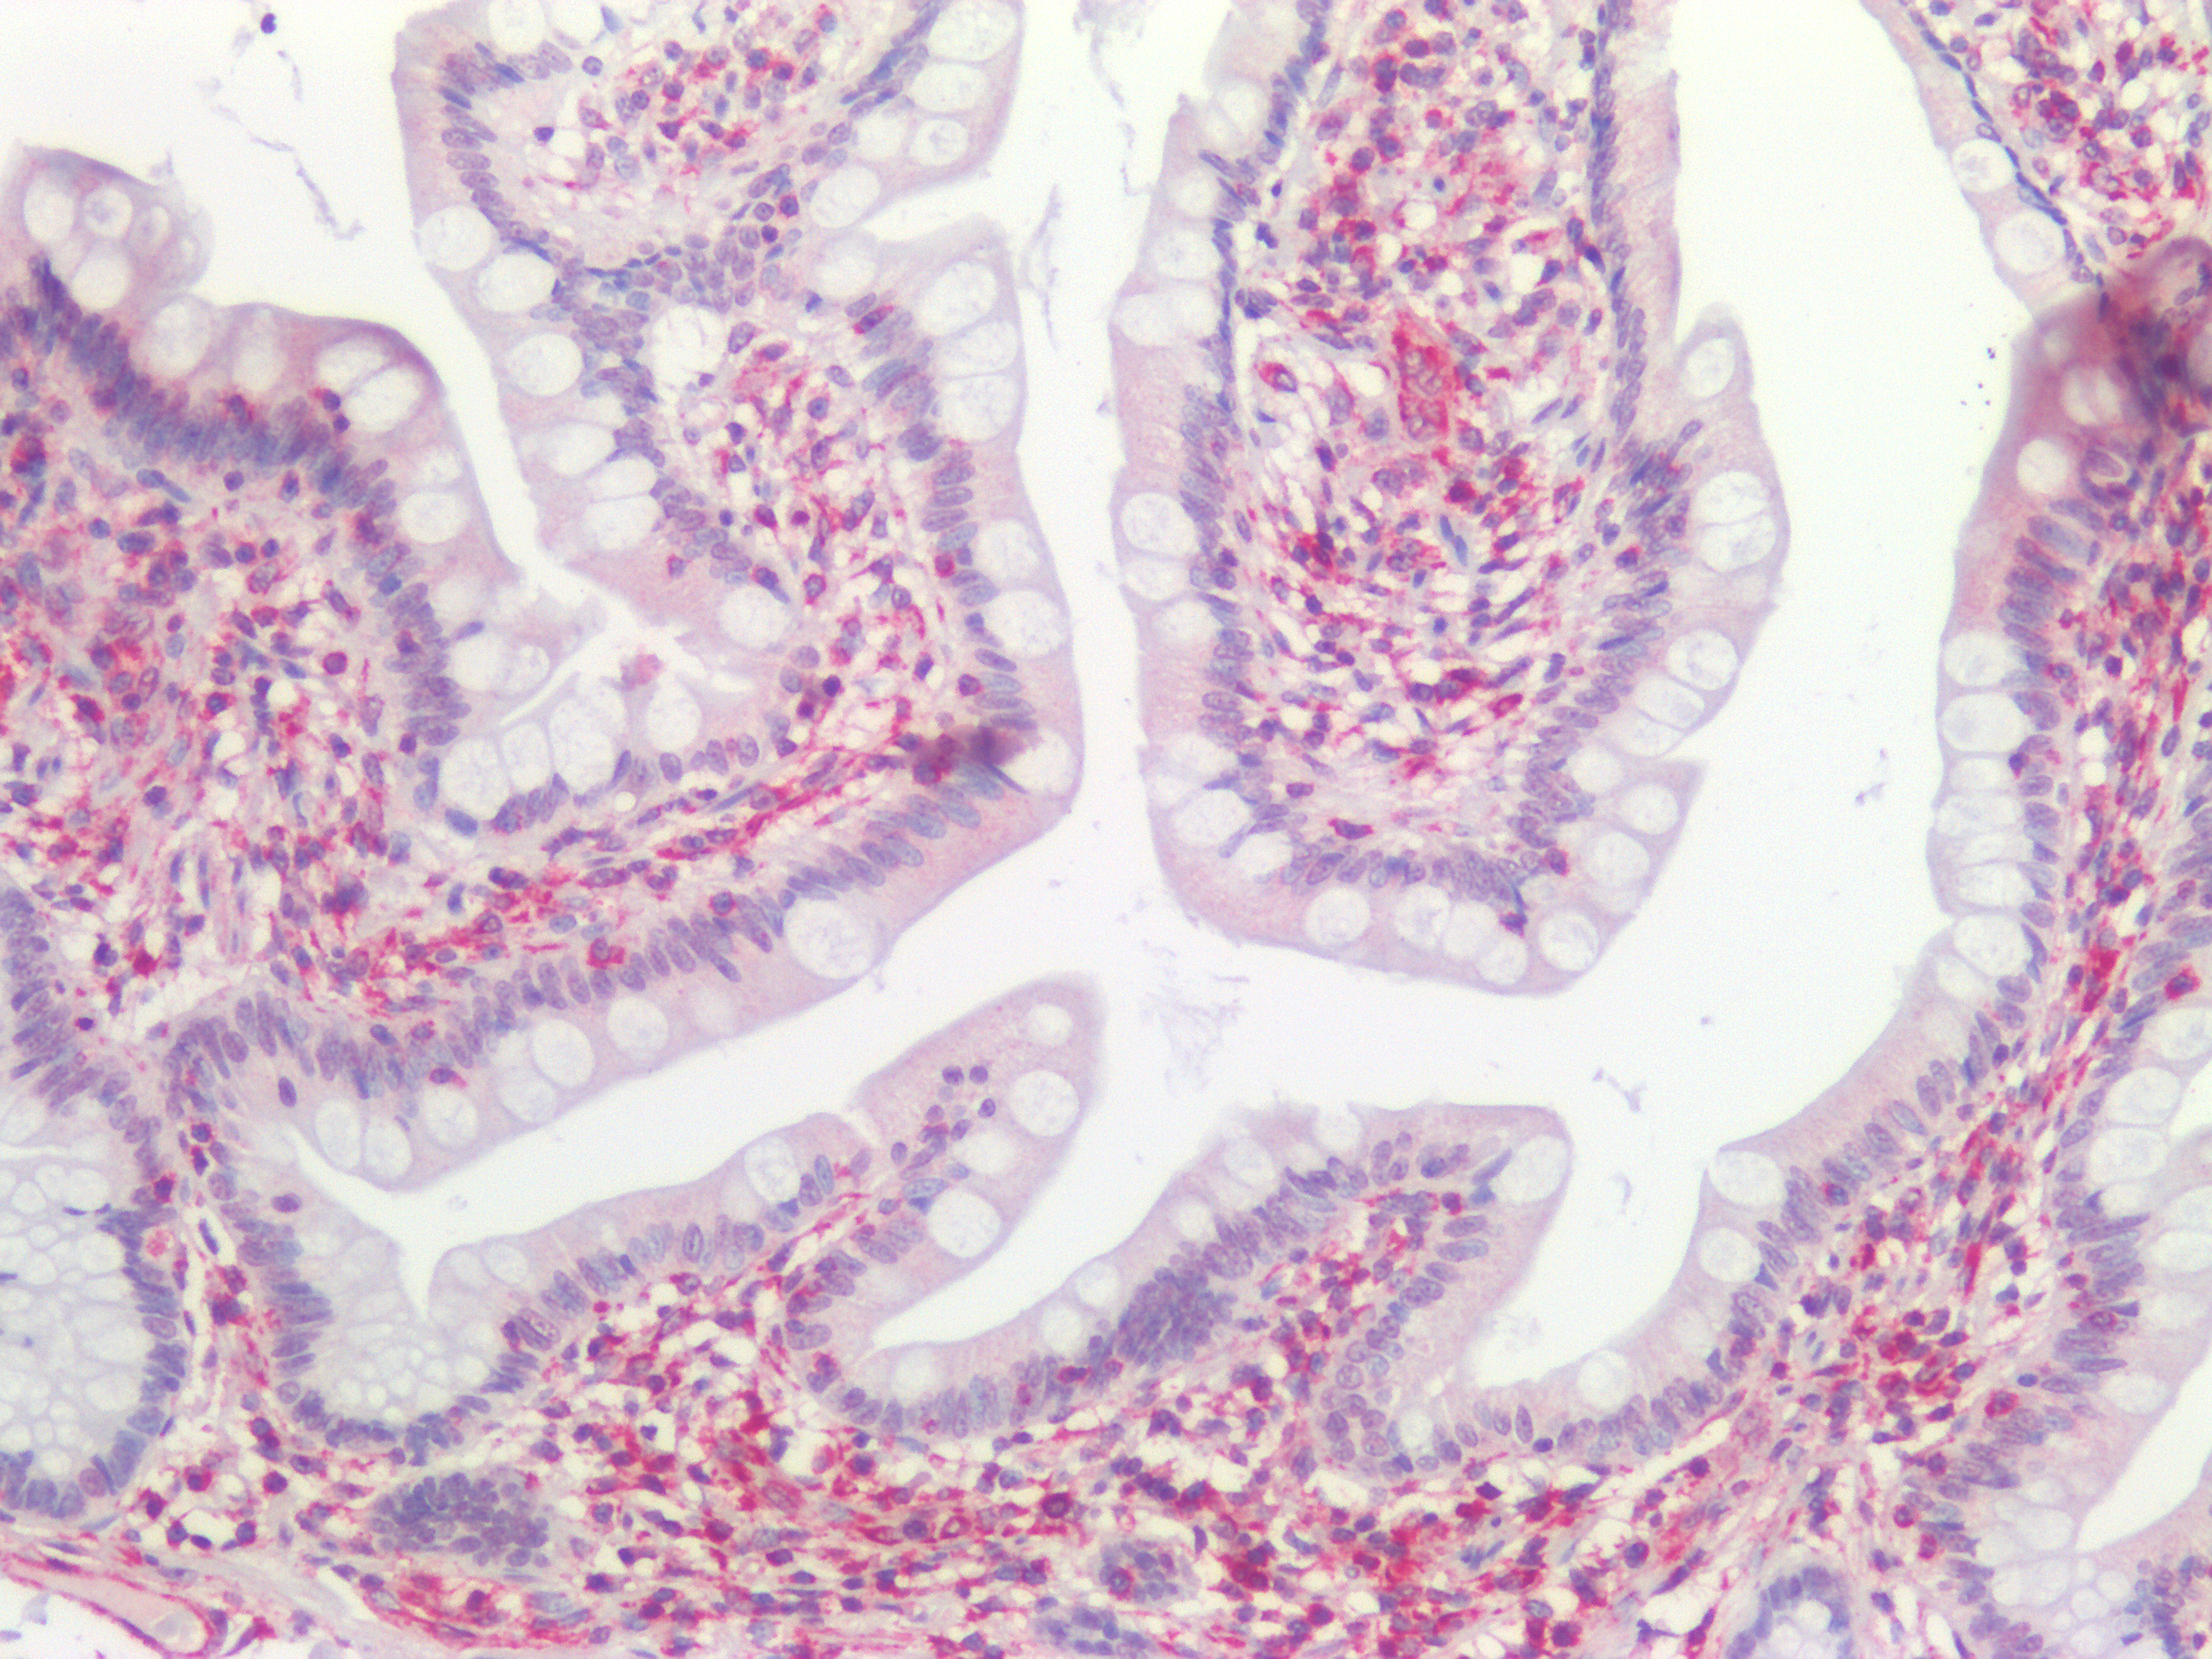 Figure 10. Immunohistochemistry on formalin fixed, paraffin embedded section of human small intestine showing positive staining in connective tissue cells and no reactivity in epithelial cells.